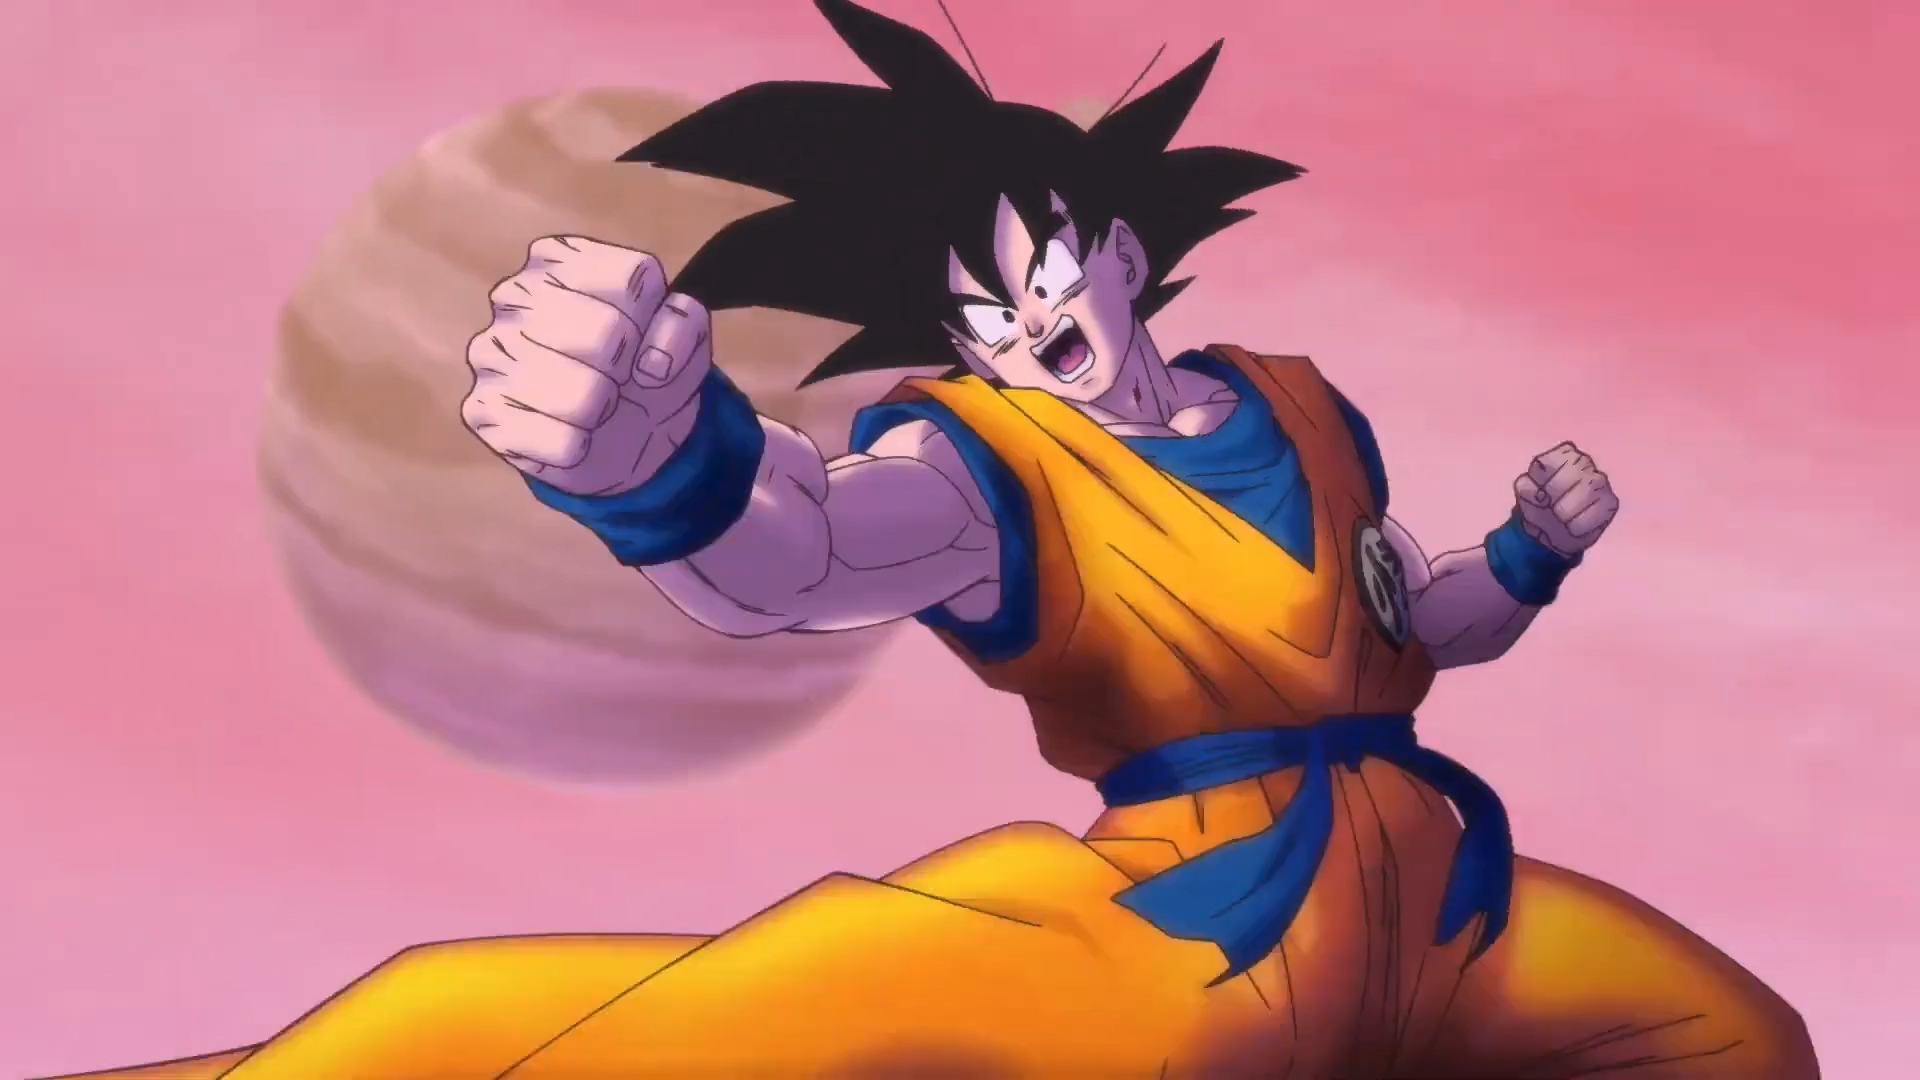 Dragon Ball Super Anime: New Update Teases Return! Release Date & More